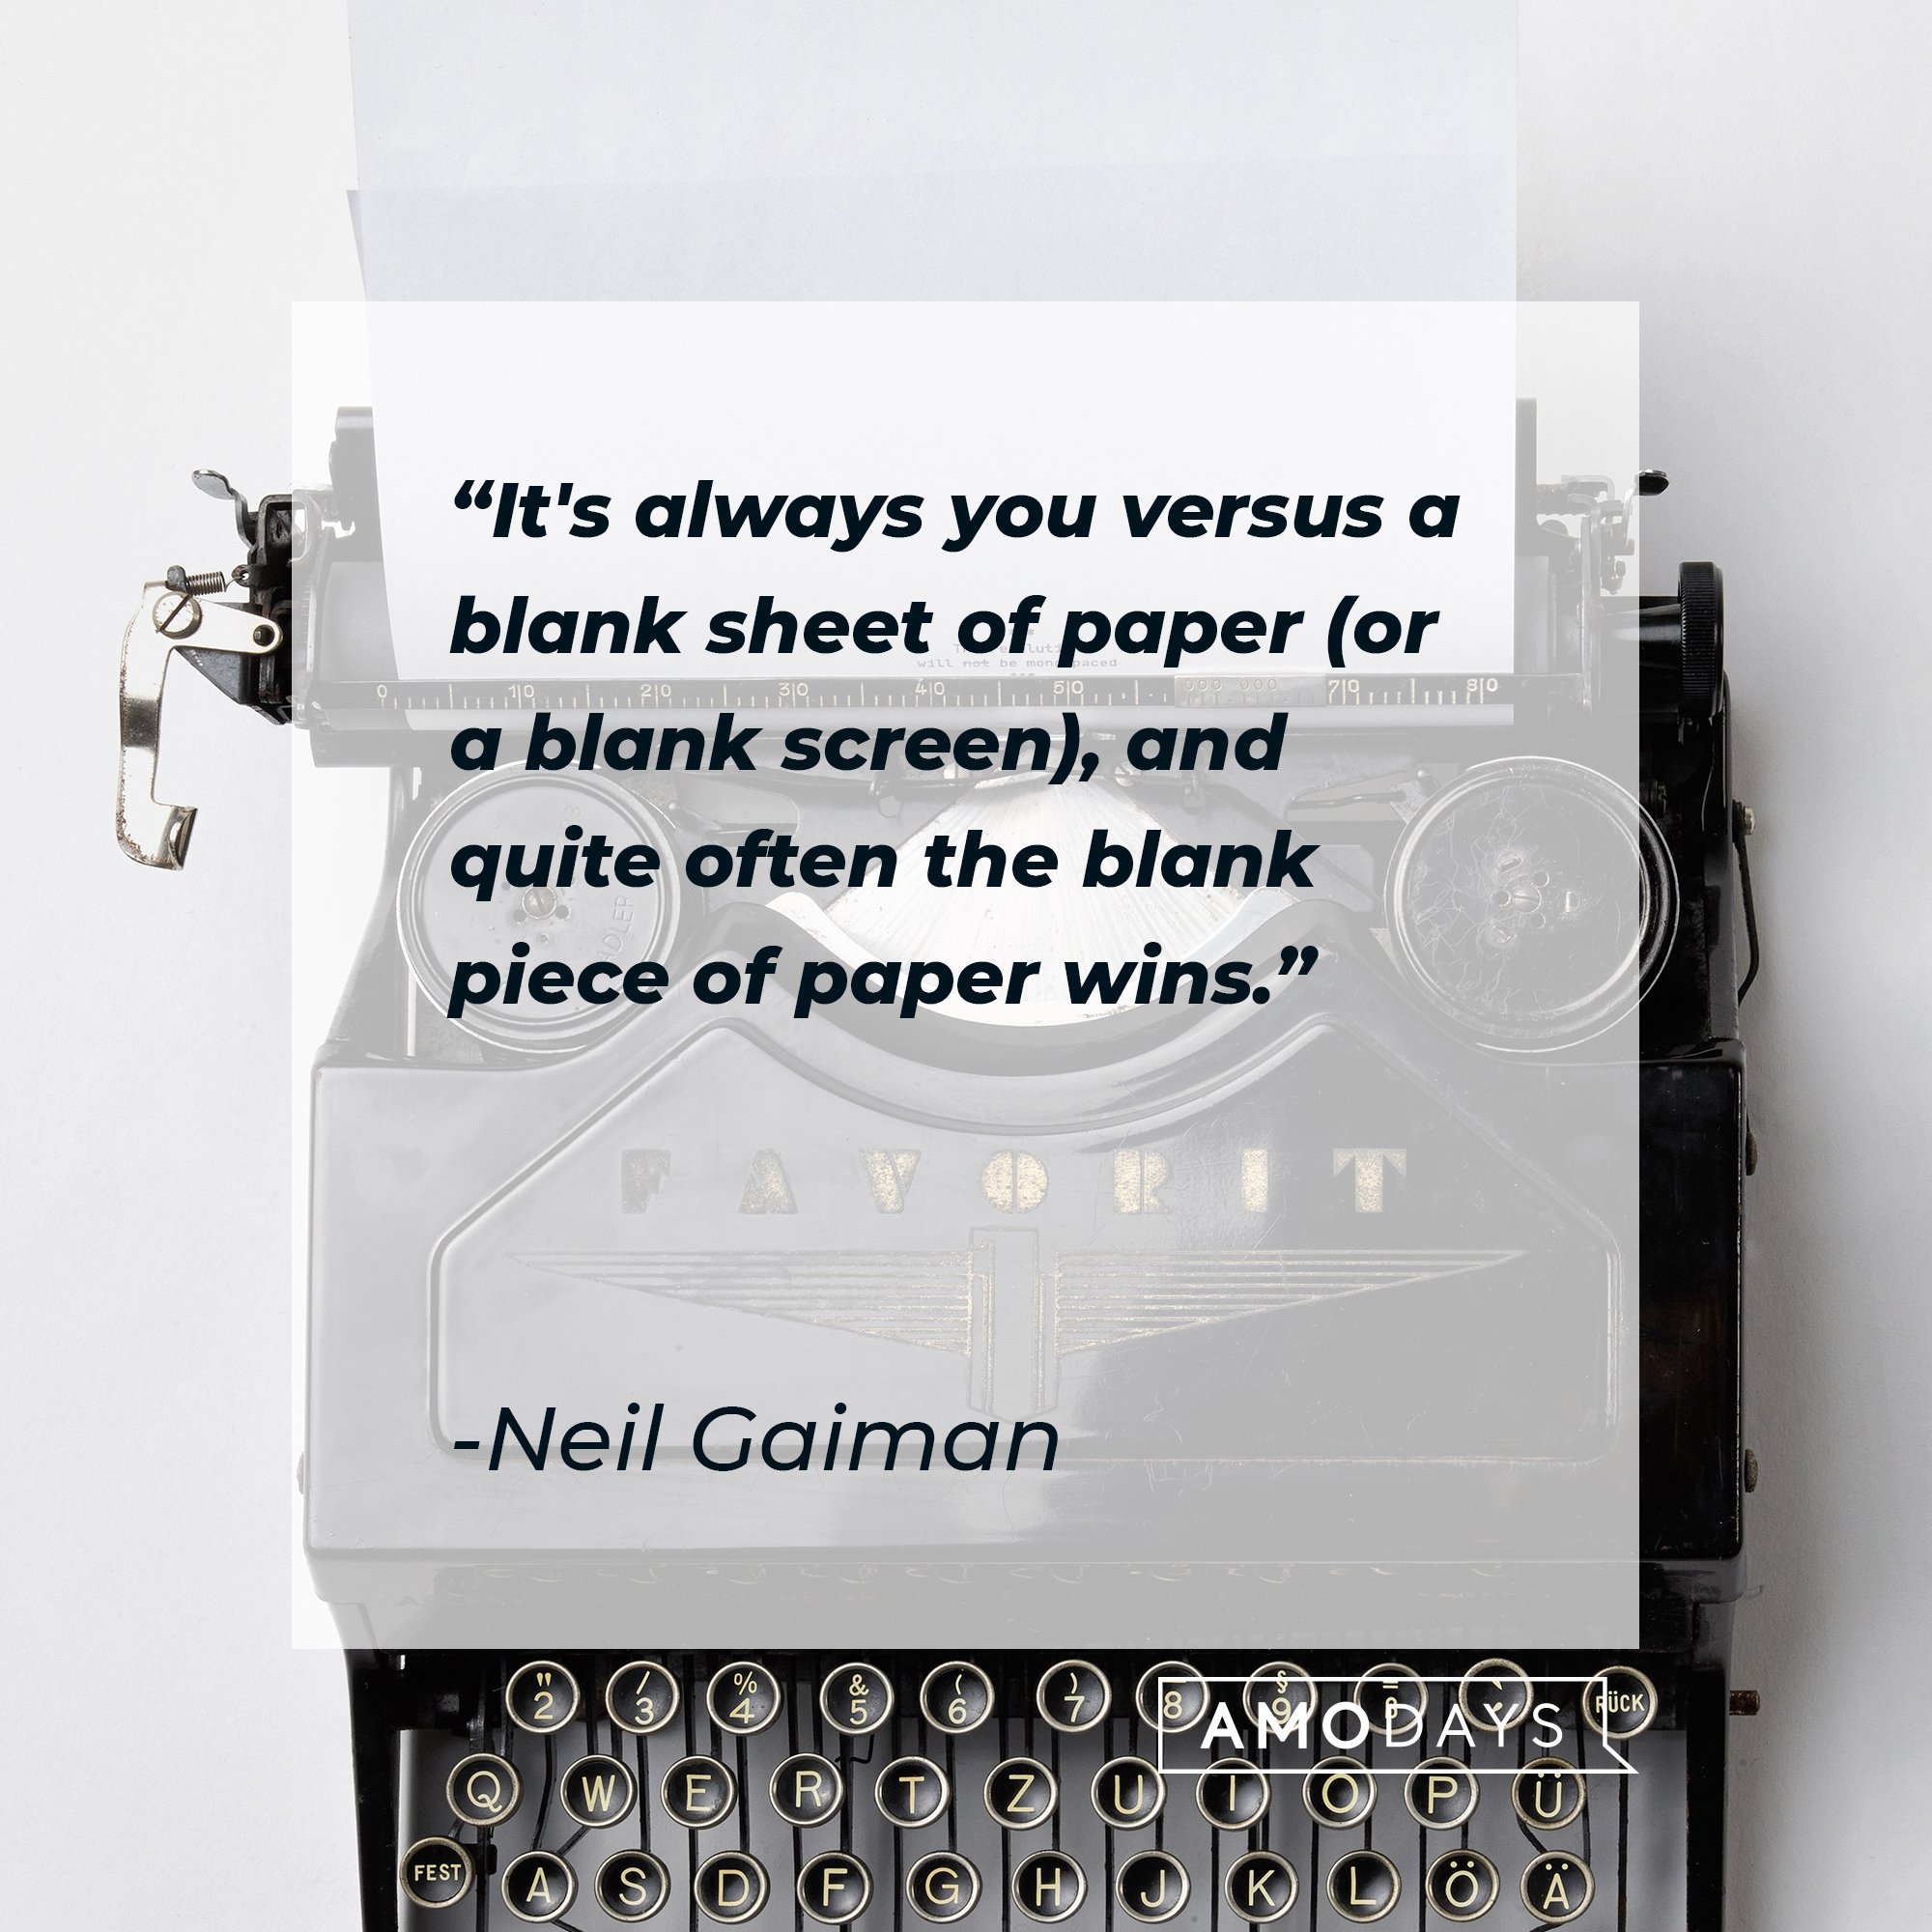 Neil Gaiman’s quote: "It's always you versus a blank sheet of paper (or a blank screen), and quite often the blank piece of paper wins." | Image: AmoDays